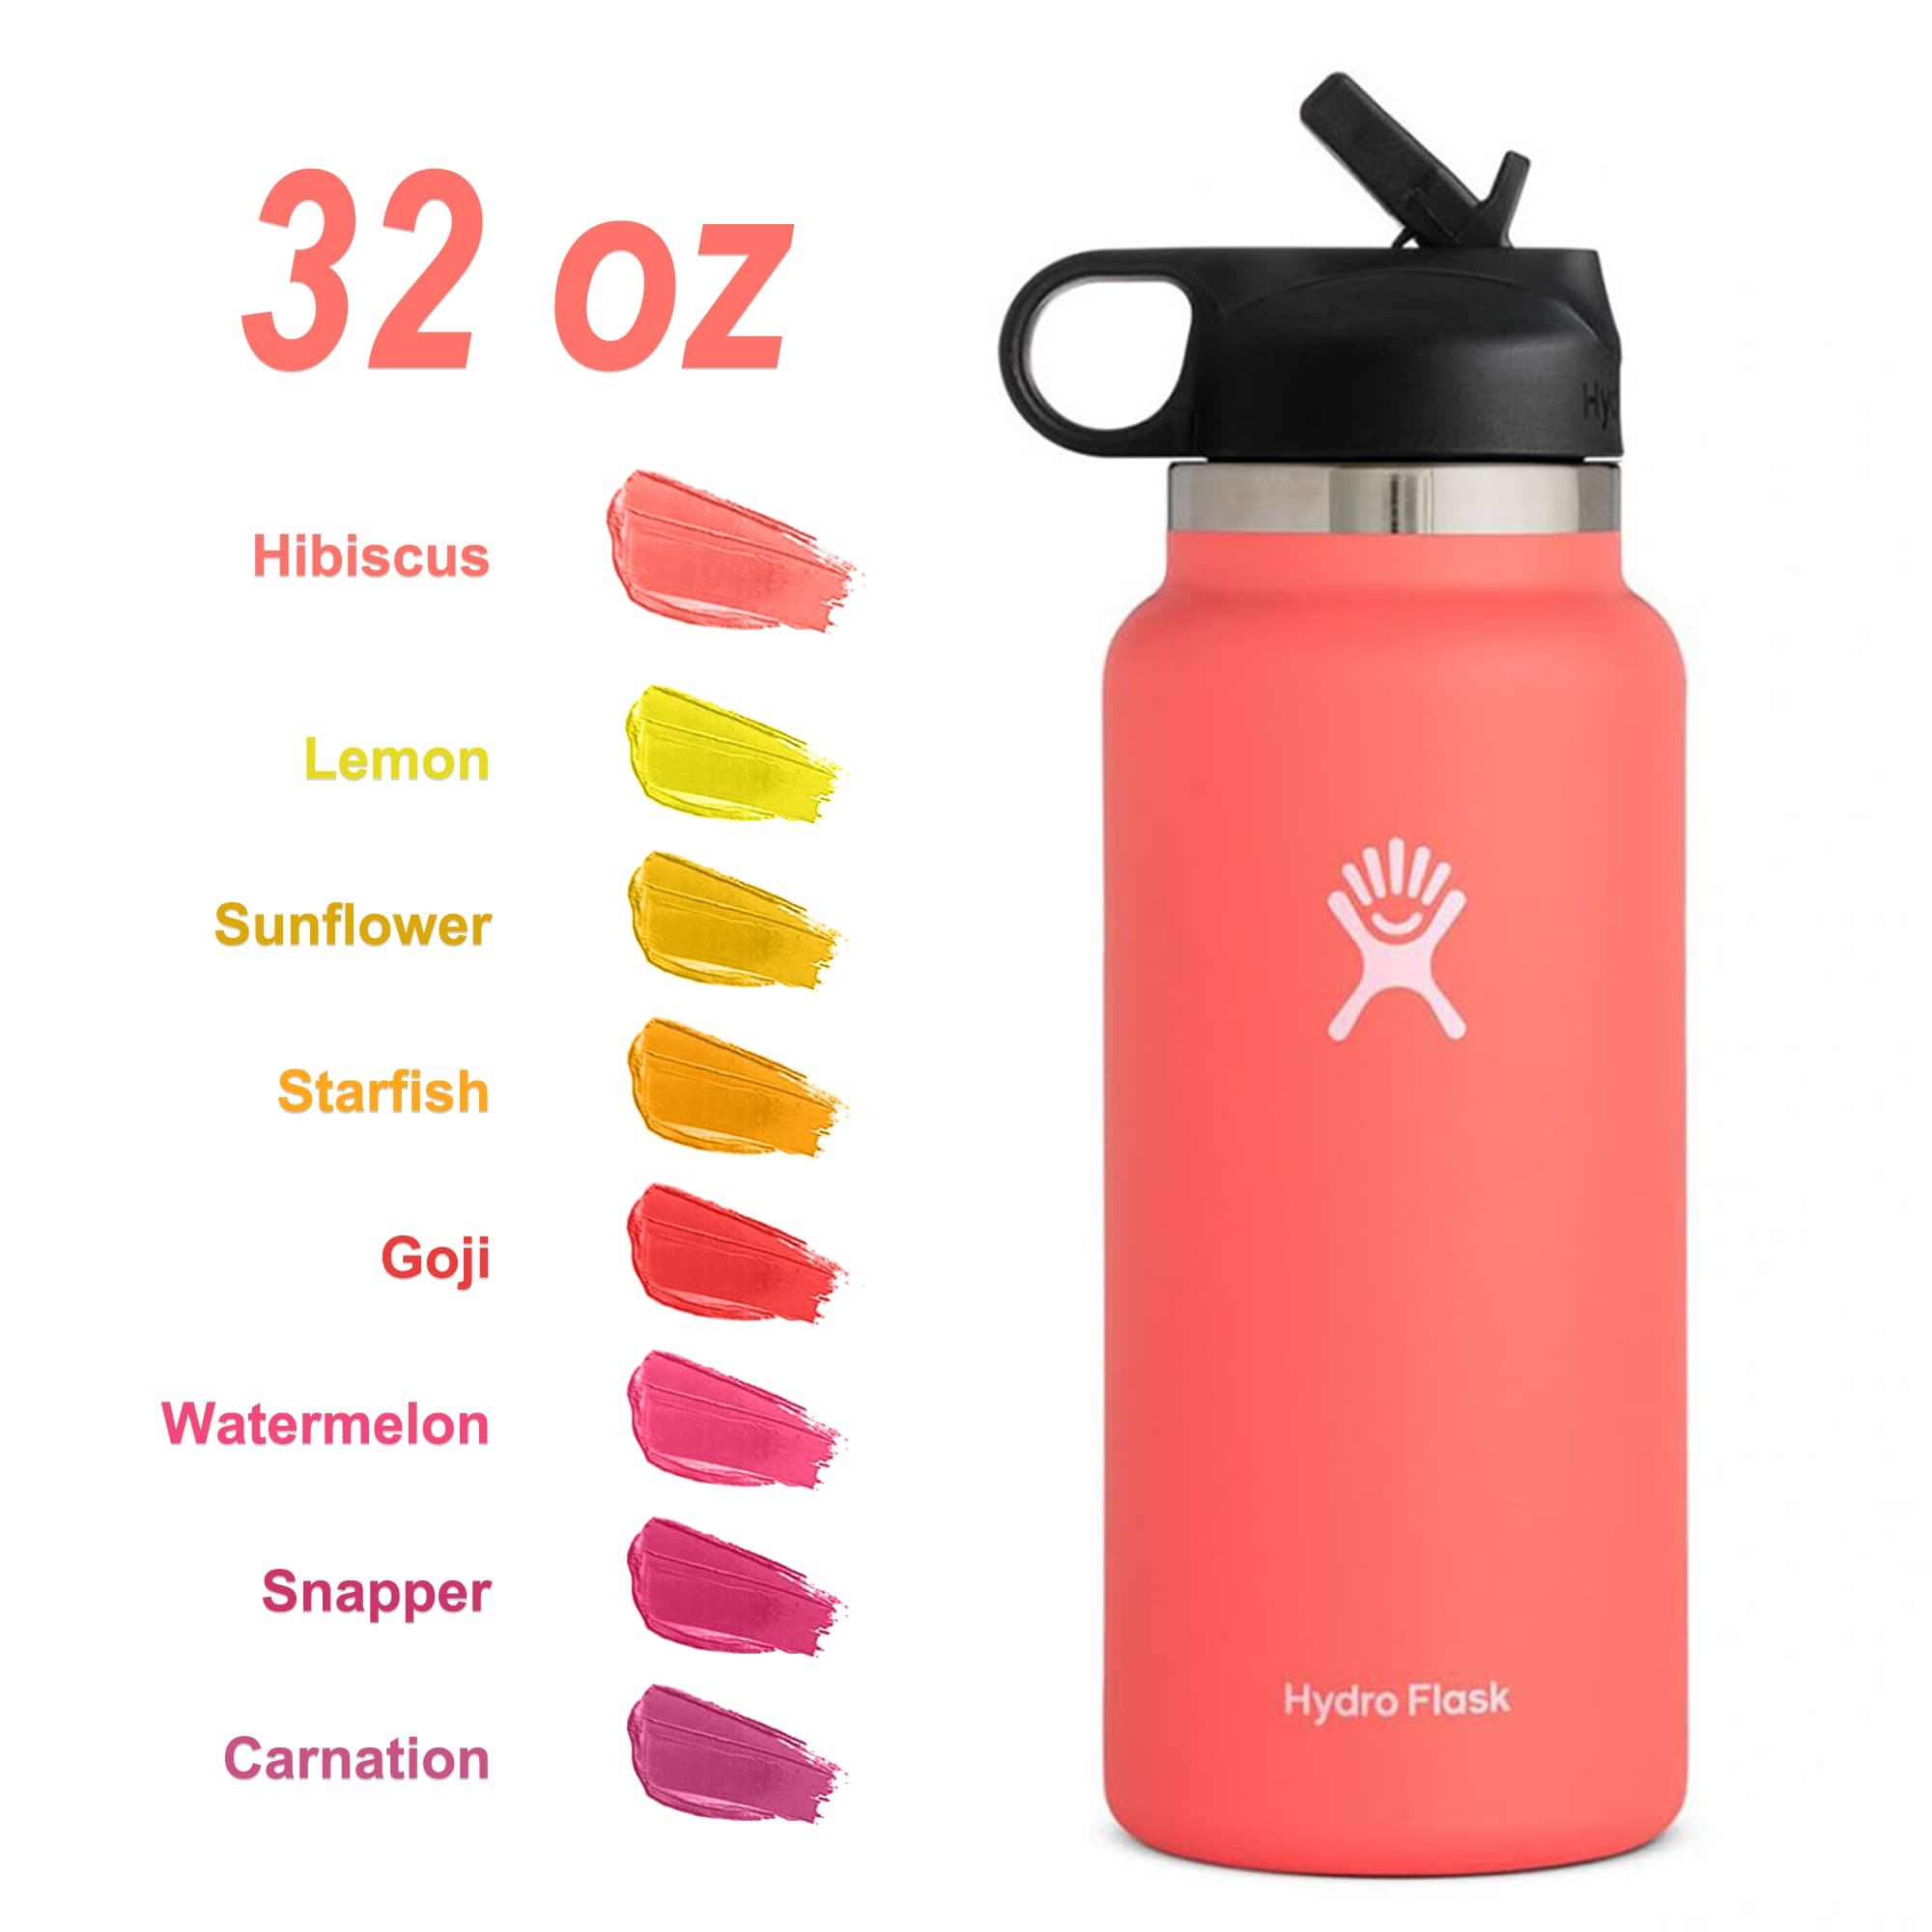  Hydro Flask Water Bottle - Standard Mouth Flex Lid - 18 oz,  Hibiscus : Sports & Outdoors